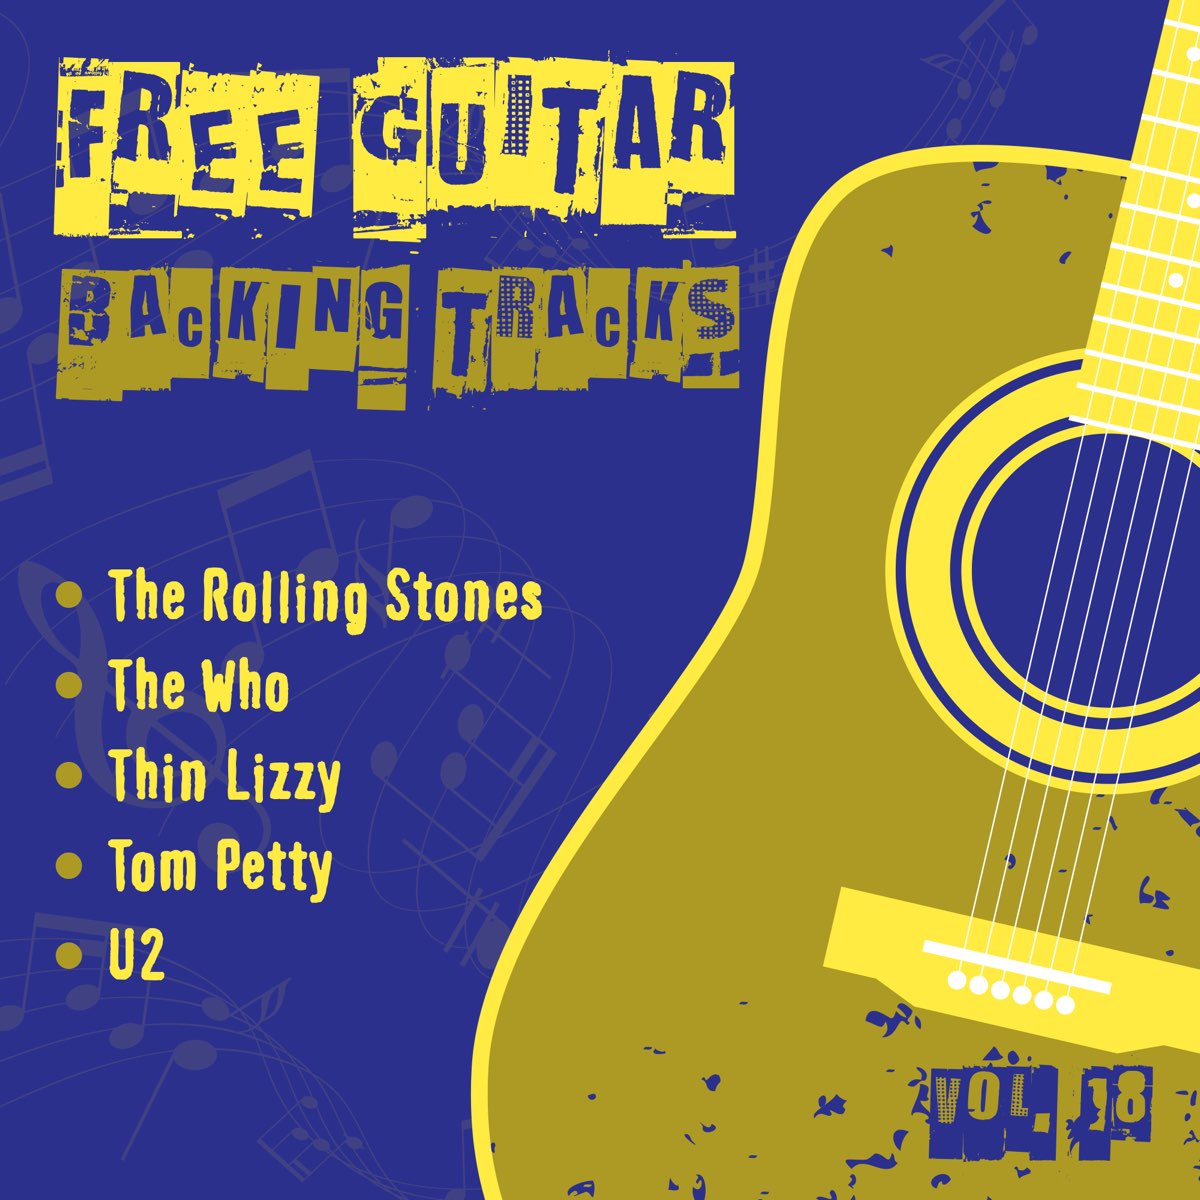 Free Guitar Backing Tracks, Vol. 18 by Pop Music Workshop on Apple Music